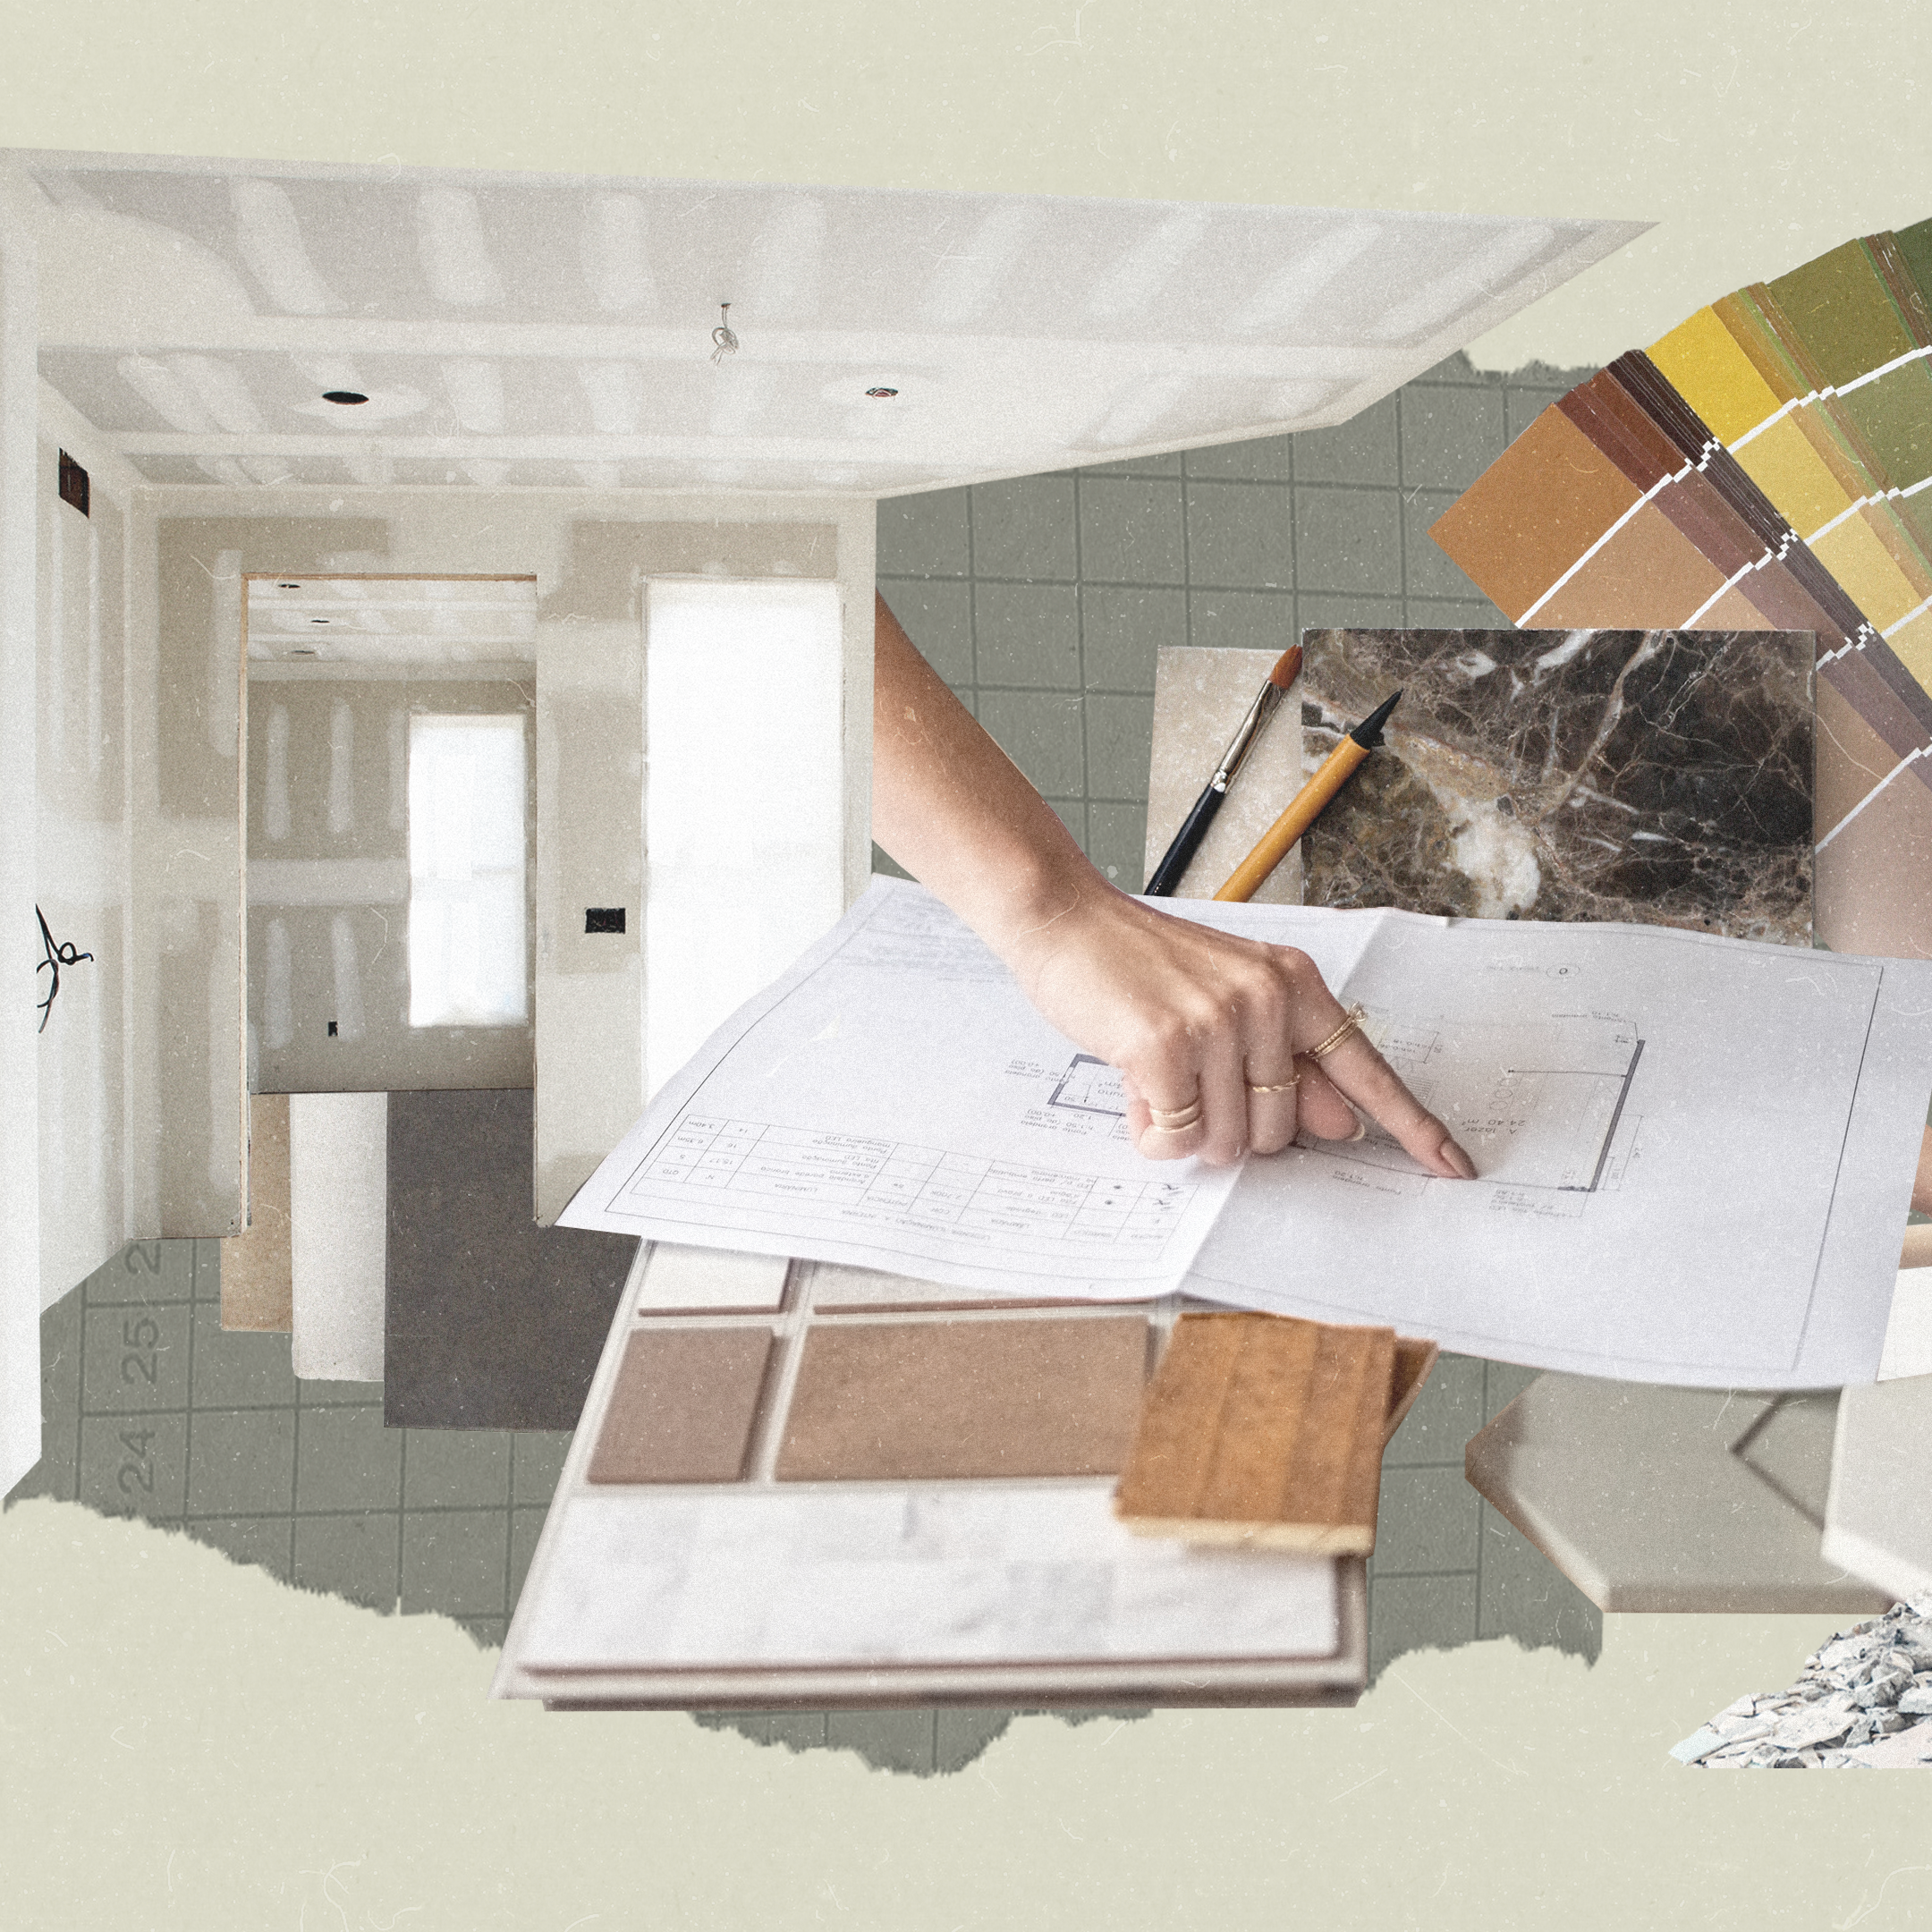 The 5 Biggest Home Renovation Mistakes, According to Design Pros